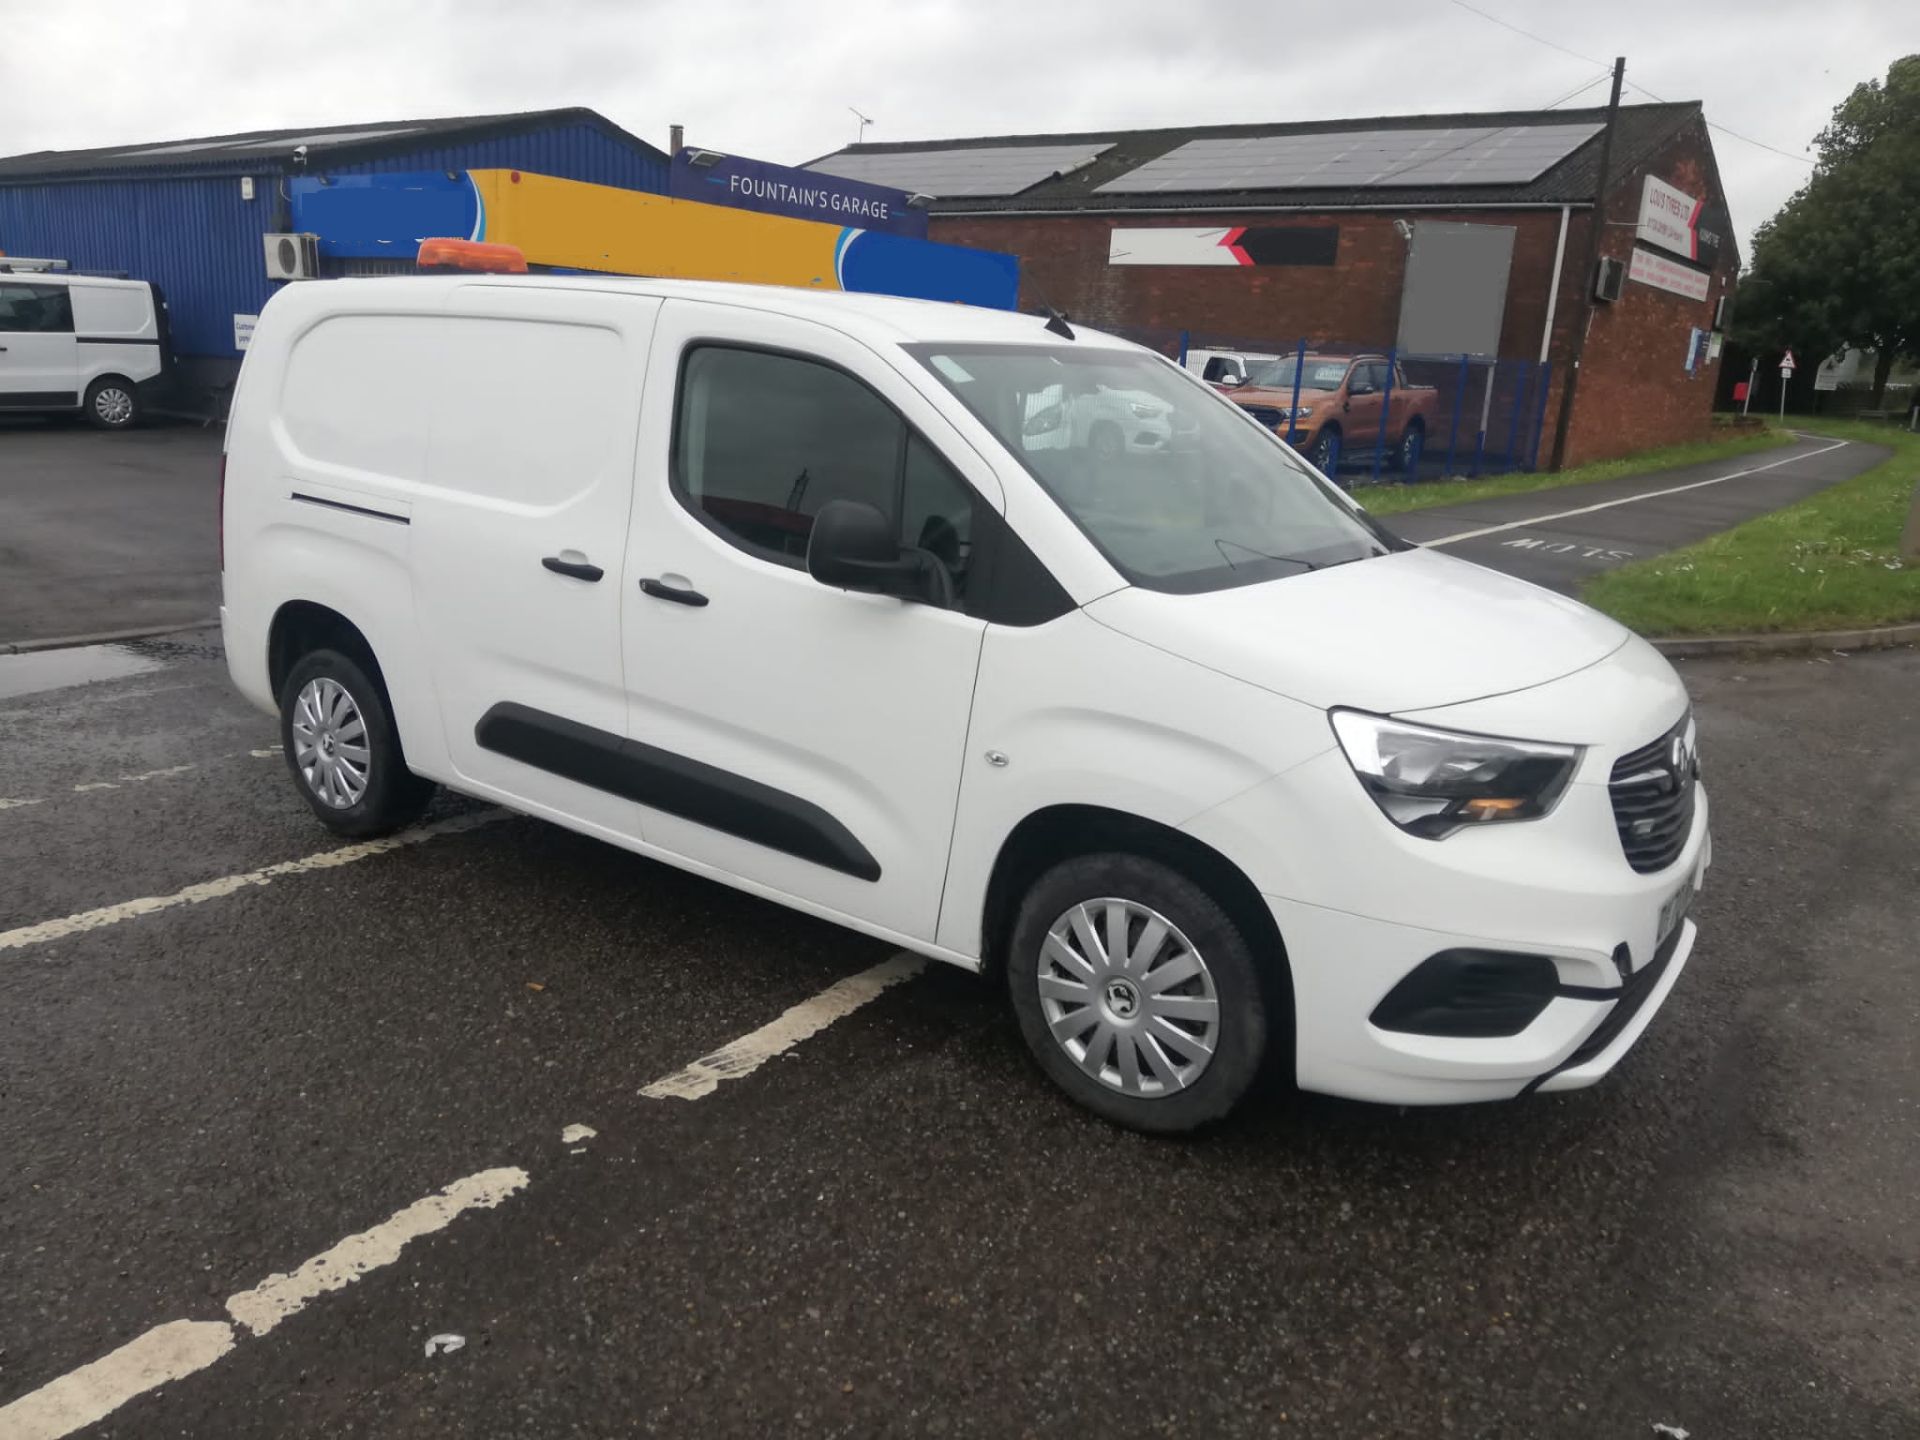 2020 70 VAUXHALL COMBO SPORTIVE LWB PANEL VAN - 48K MILES - AIR CON - PLY LINED